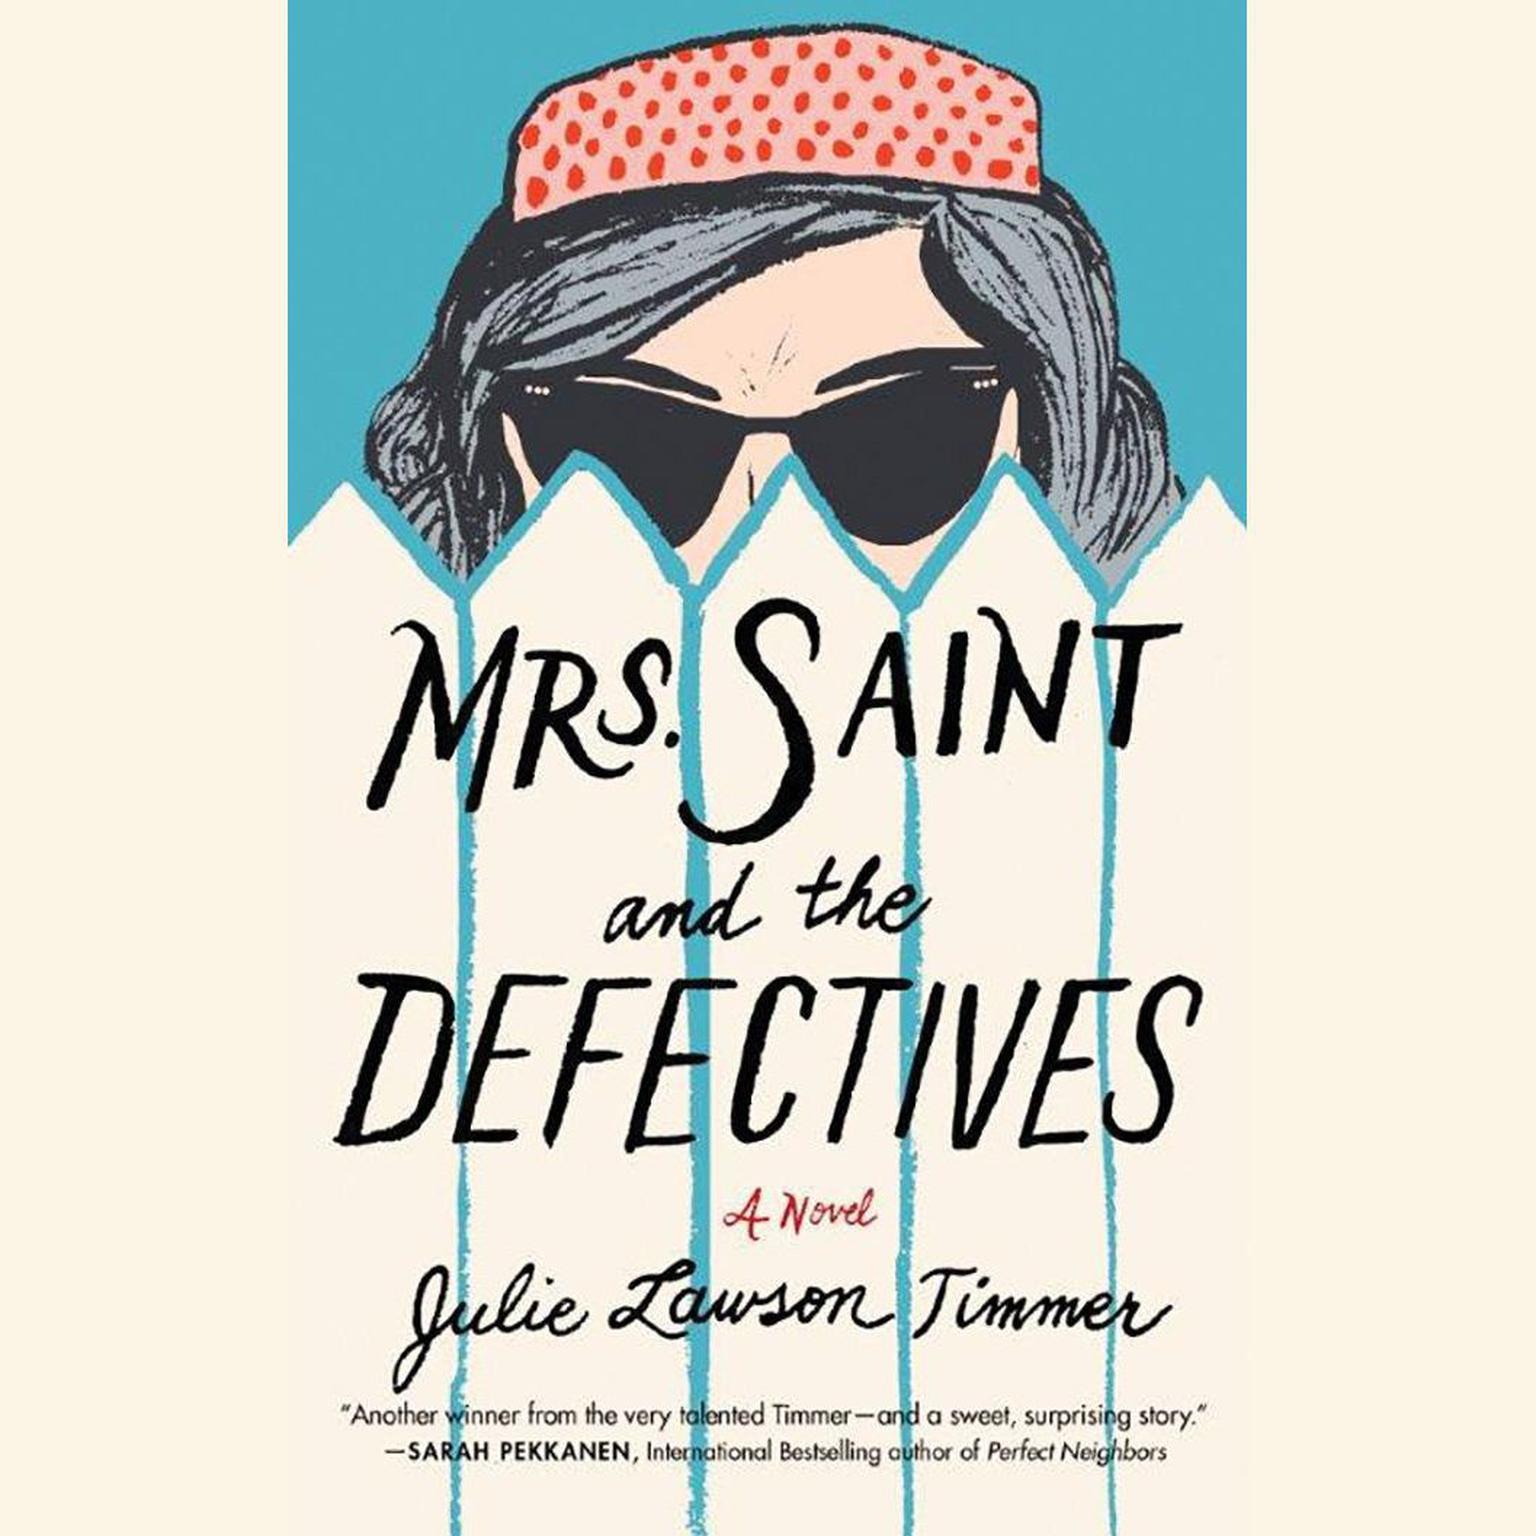 Mrs. Saint and the Defectives: A Novel Audiobook, by Julie Lawson Timmer